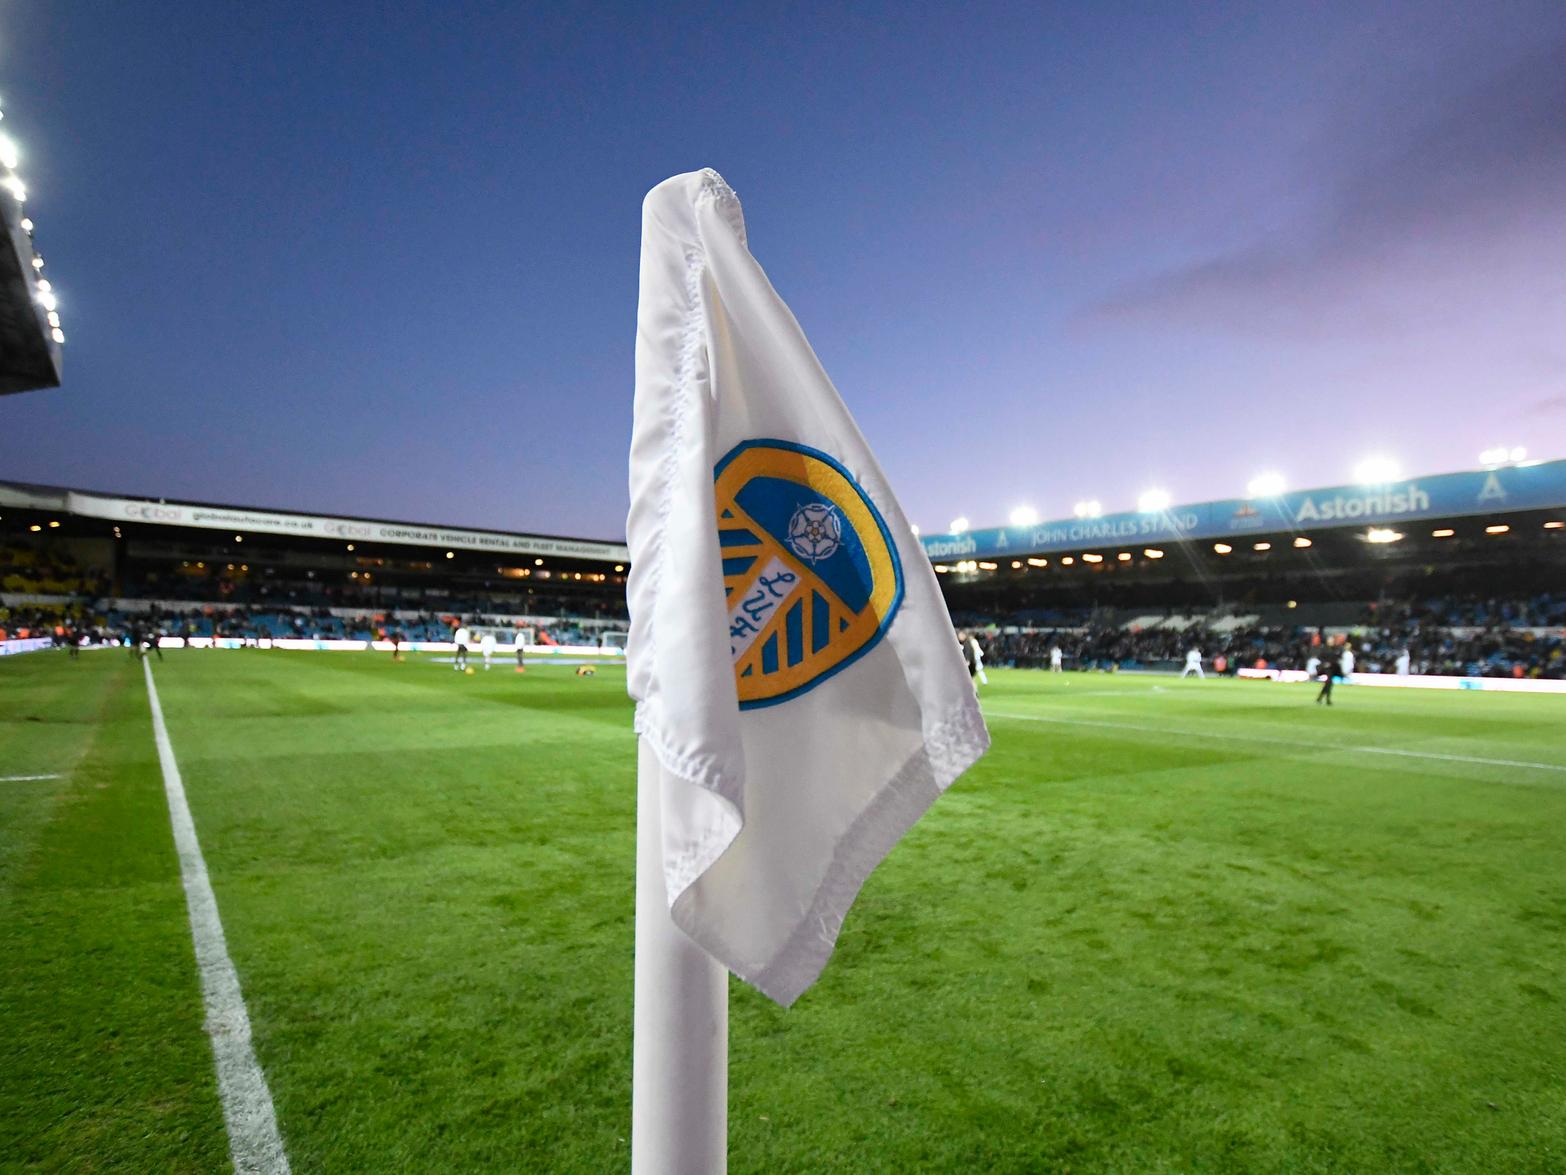 Leeds United's director of football Victor Orta has hinted that the club may not do much transfer business in January, suggesting that the slim pickings available put him off pursuing deals. (HITC)